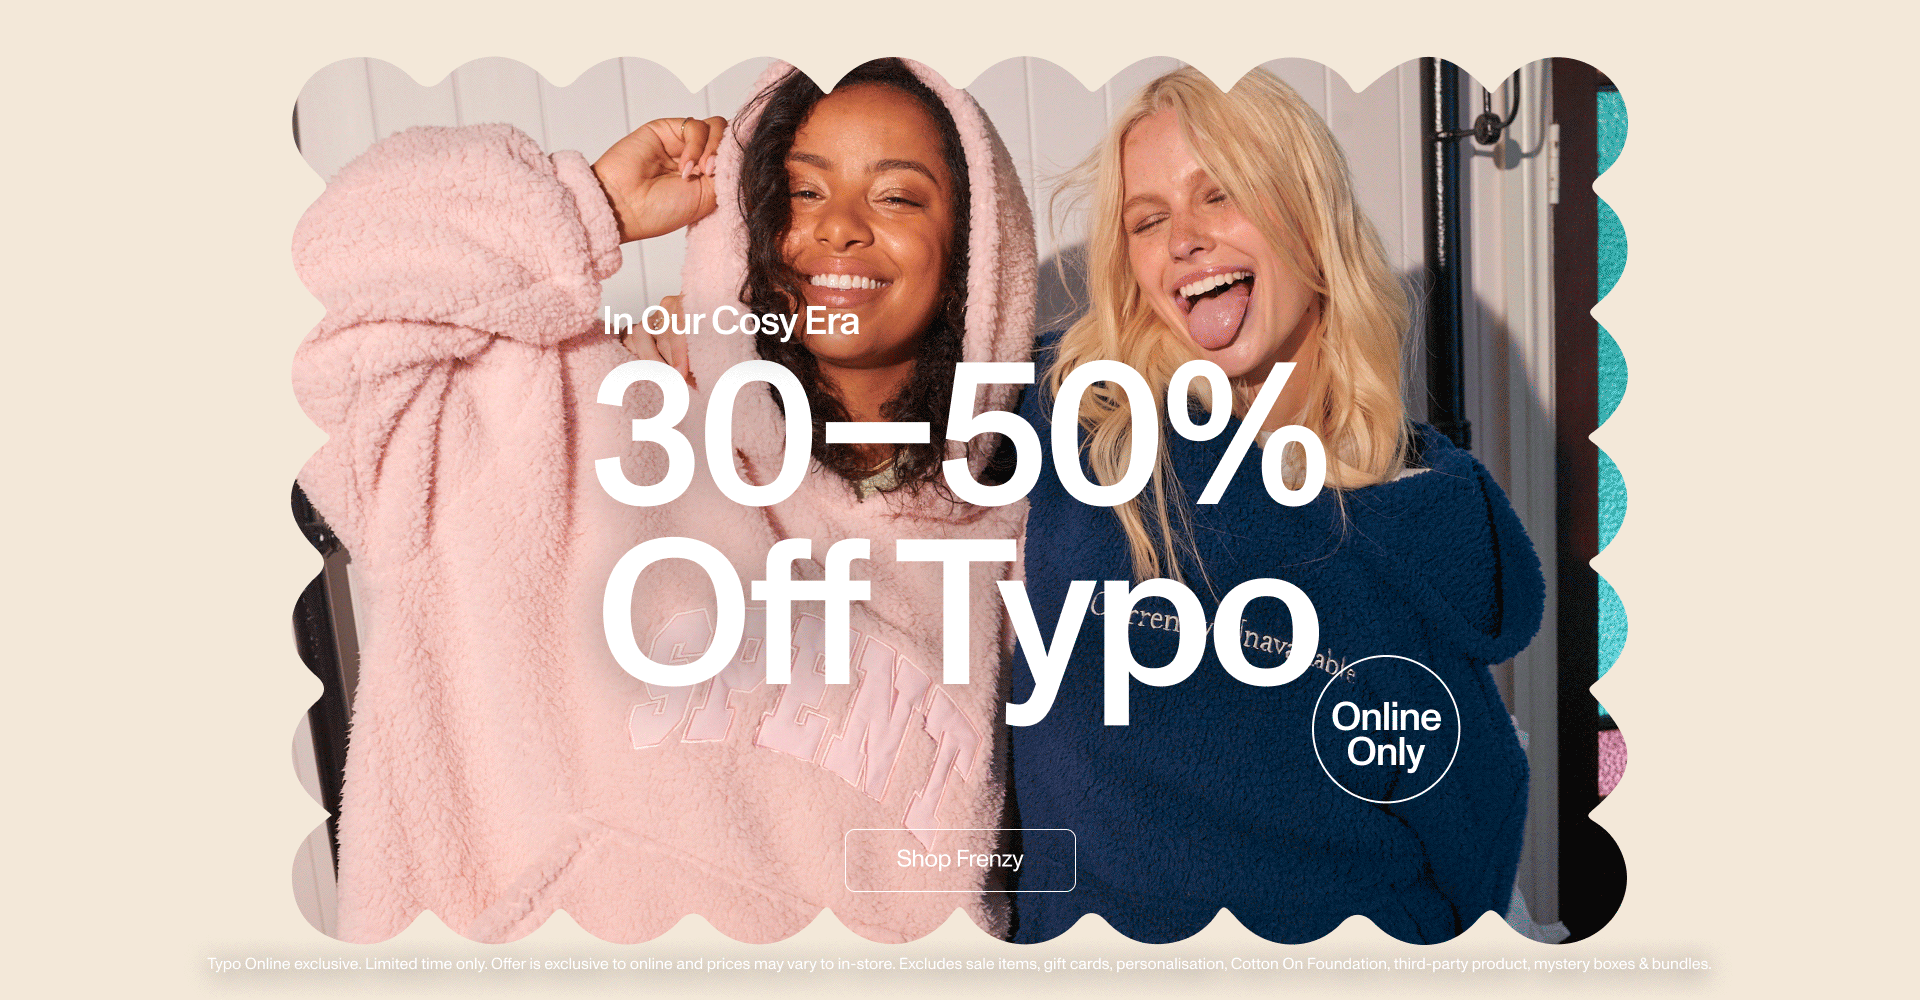 In our cosy era. 30-50% off typo. Online only. Shop frenzy.